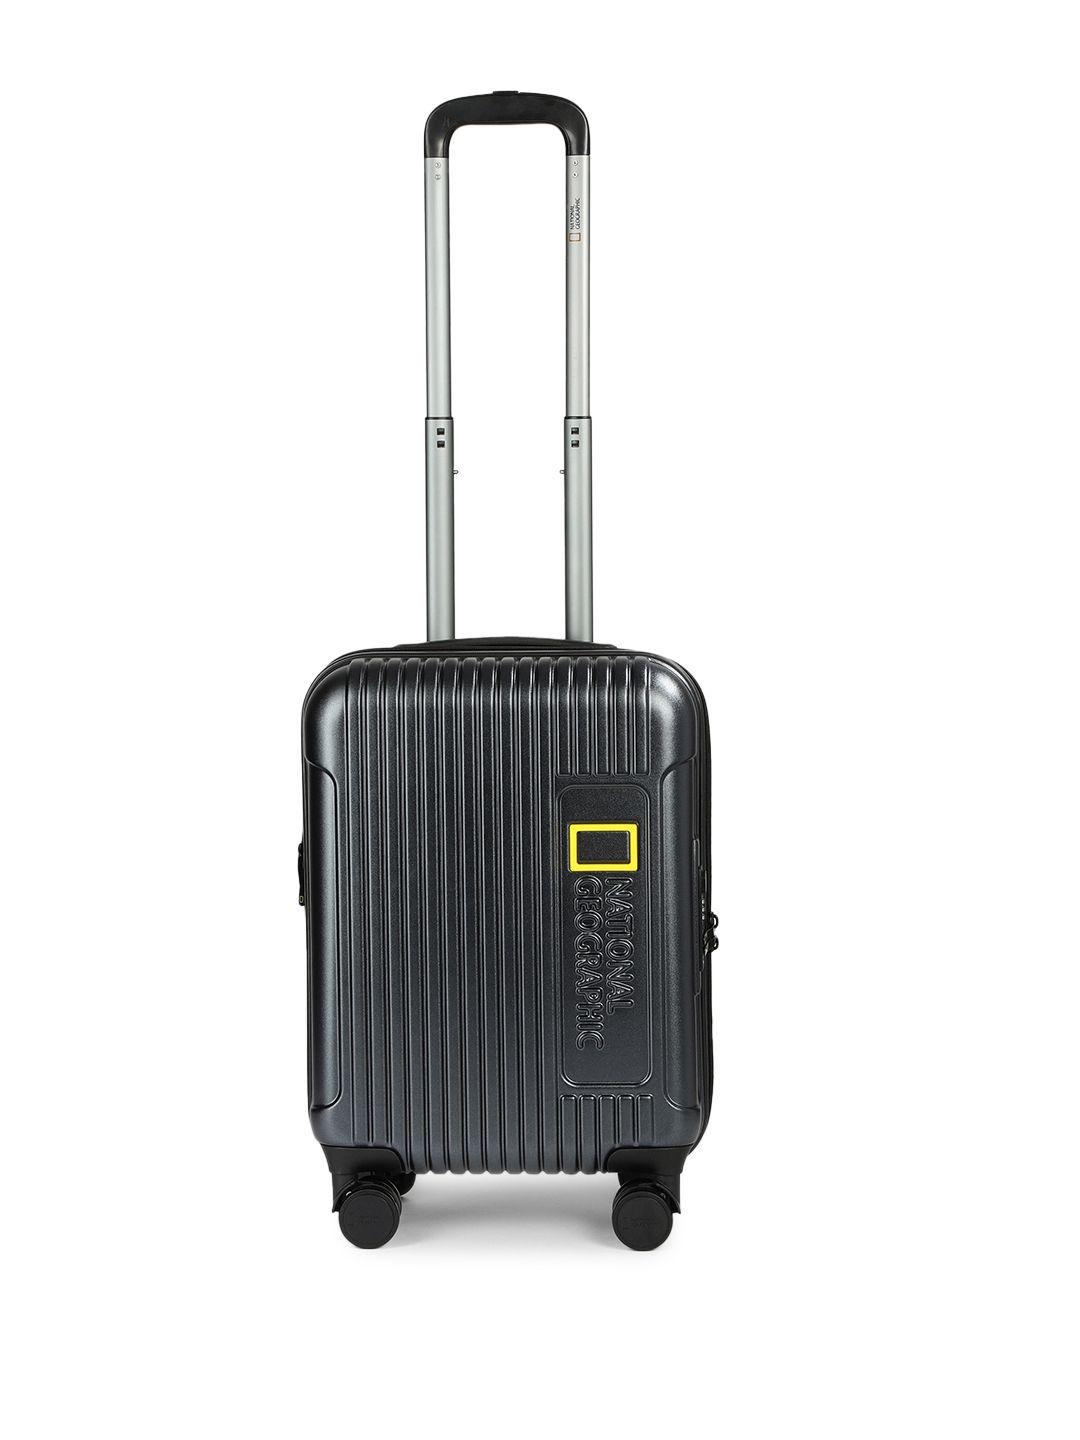 national geographic black hardsided trolley cabin suitcase